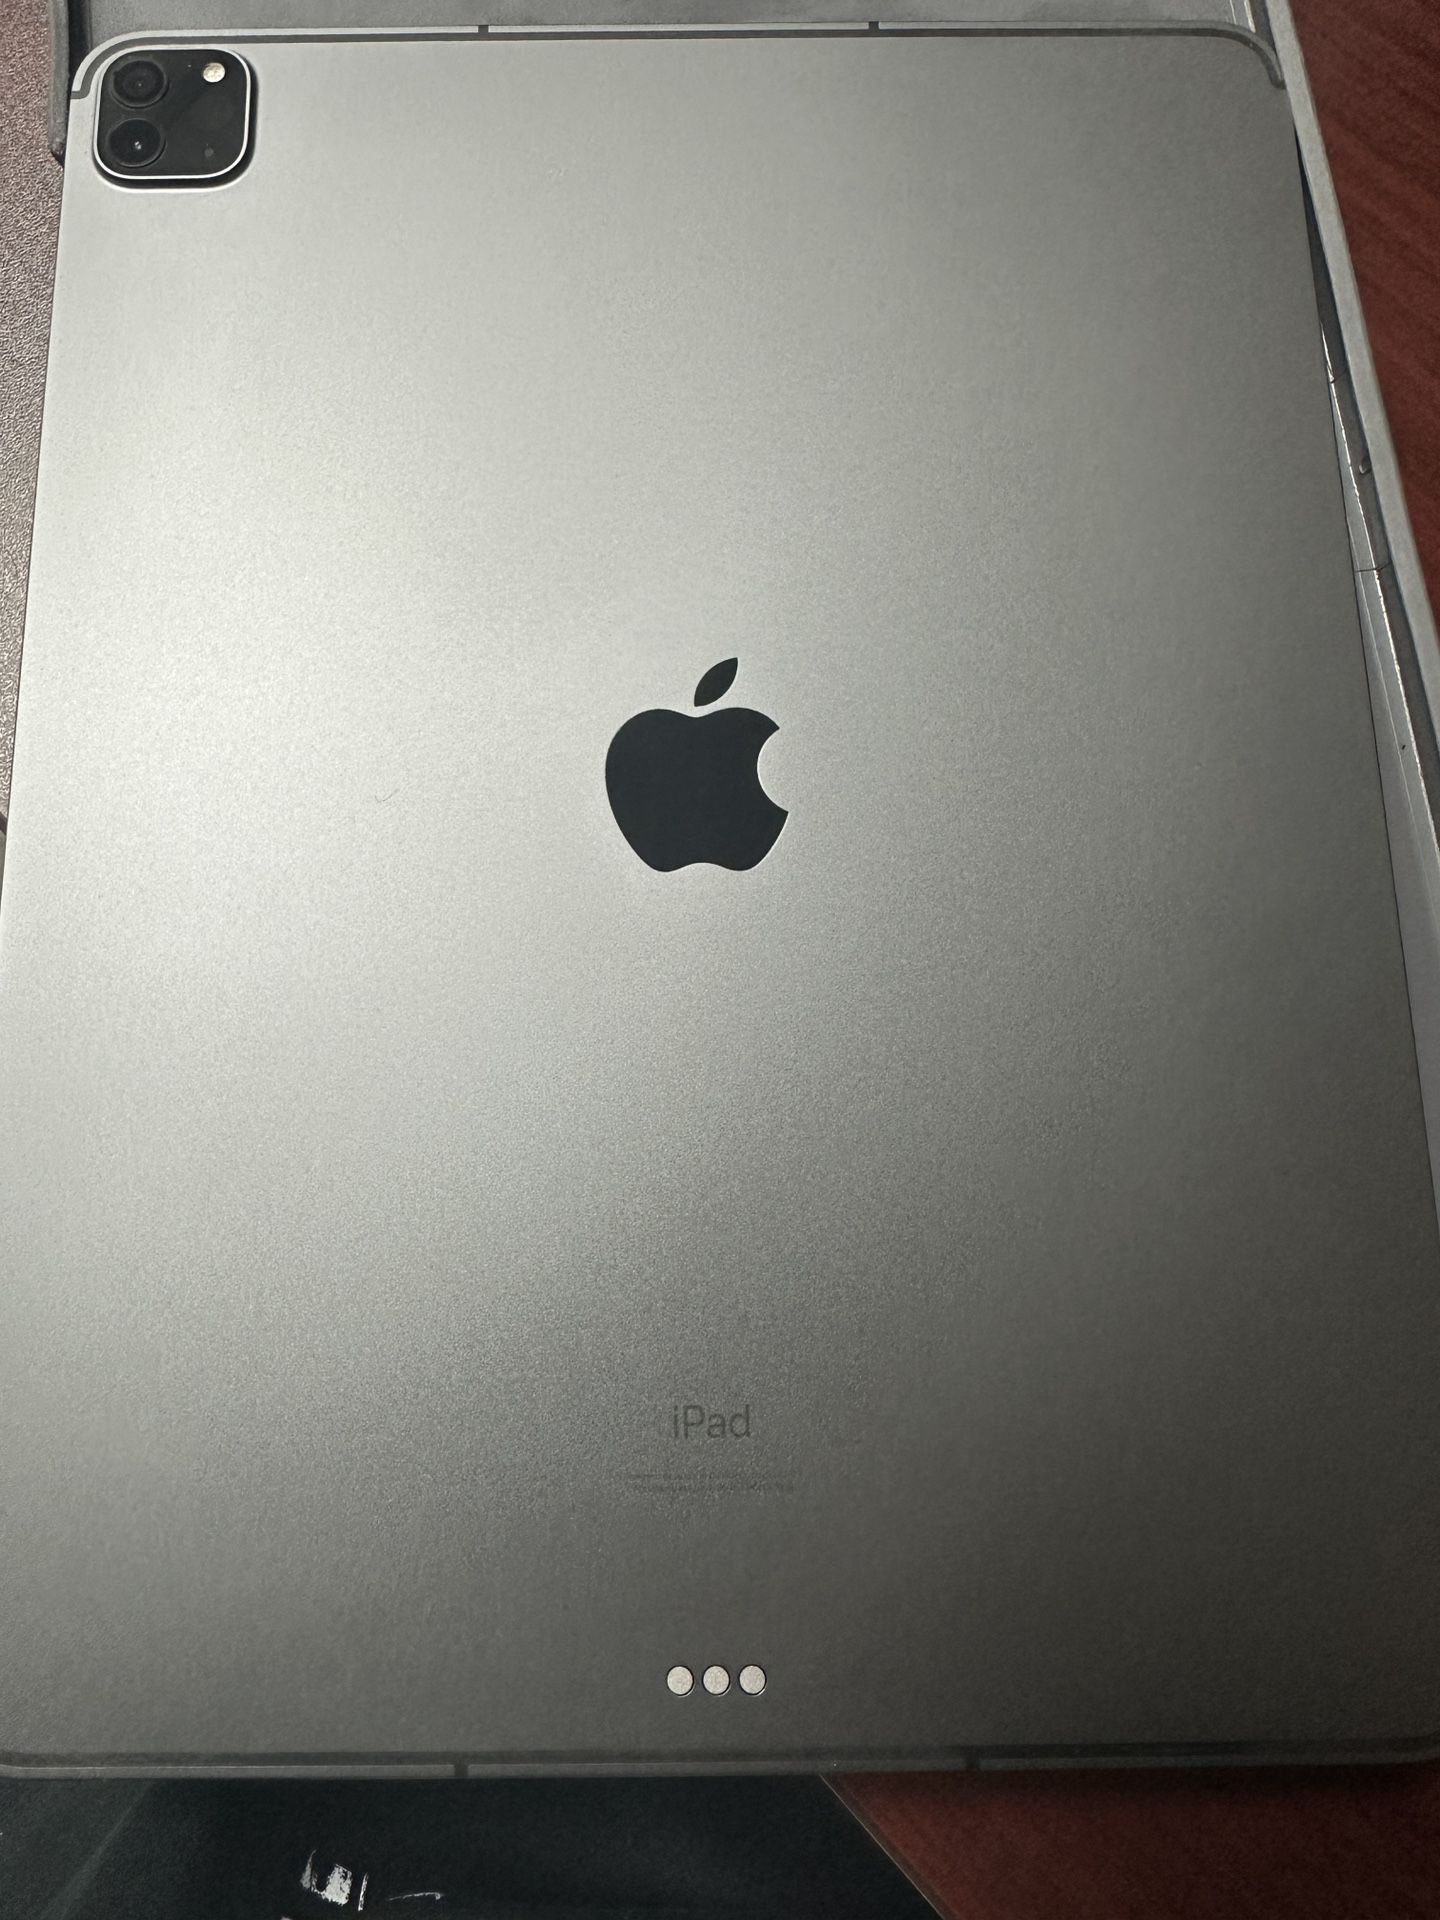 iPad Pro 12.9 Inch 256g WiFi And Cellular 5th Gen